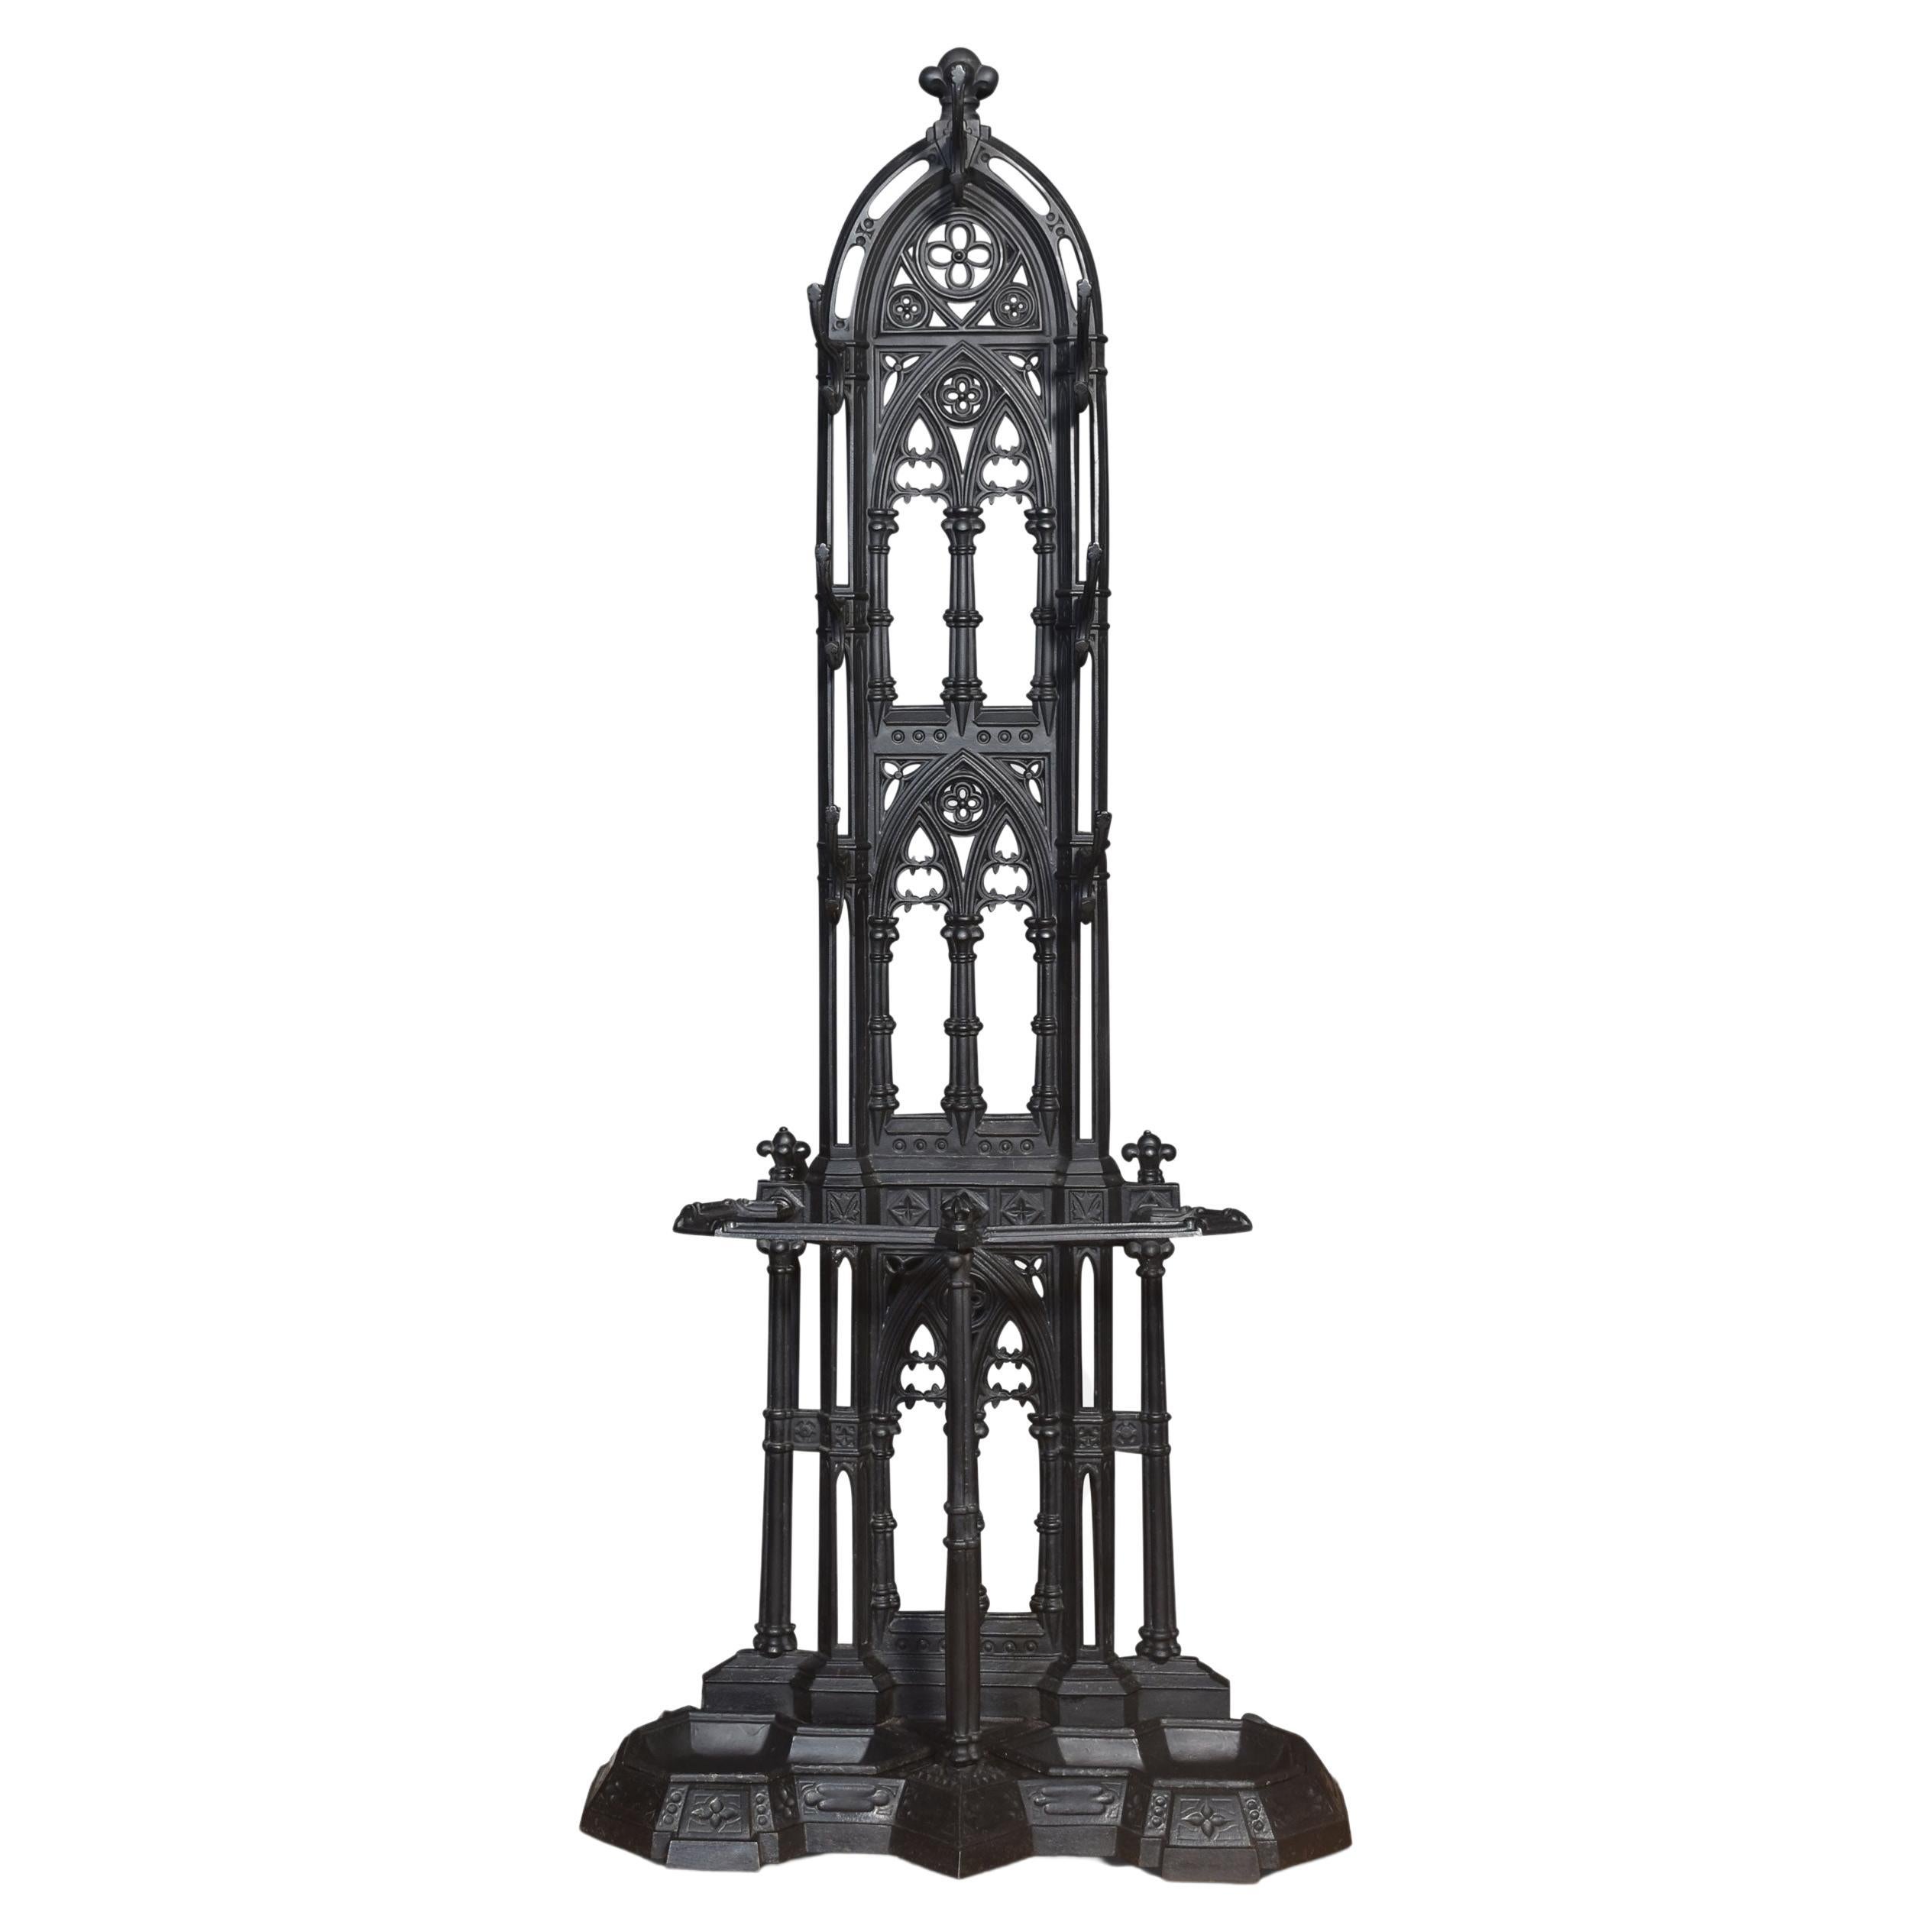 Gothic Revival cast iron hall stand